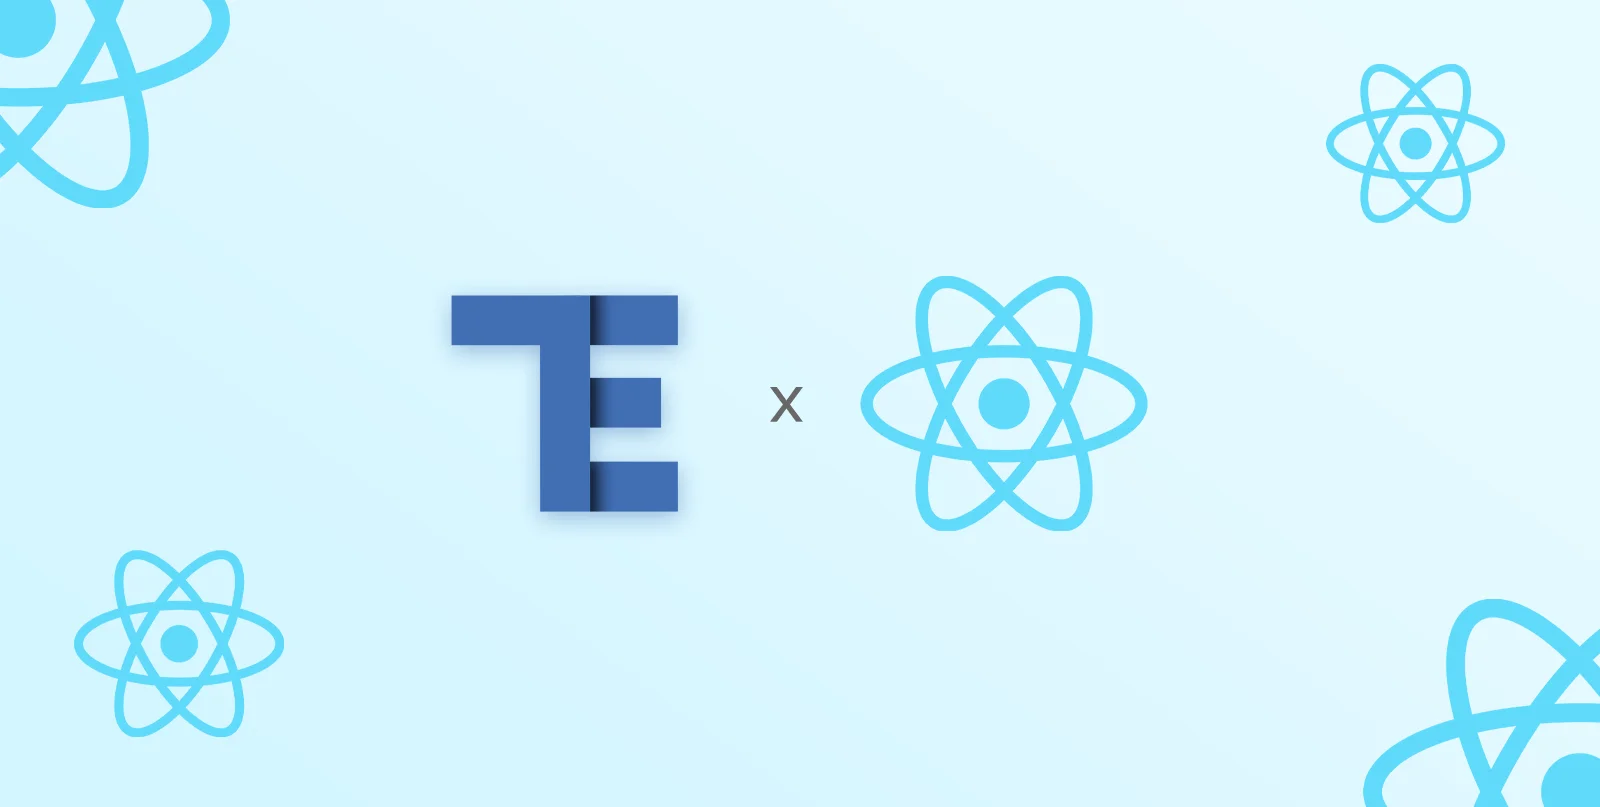 React integration for Tailwind CSS